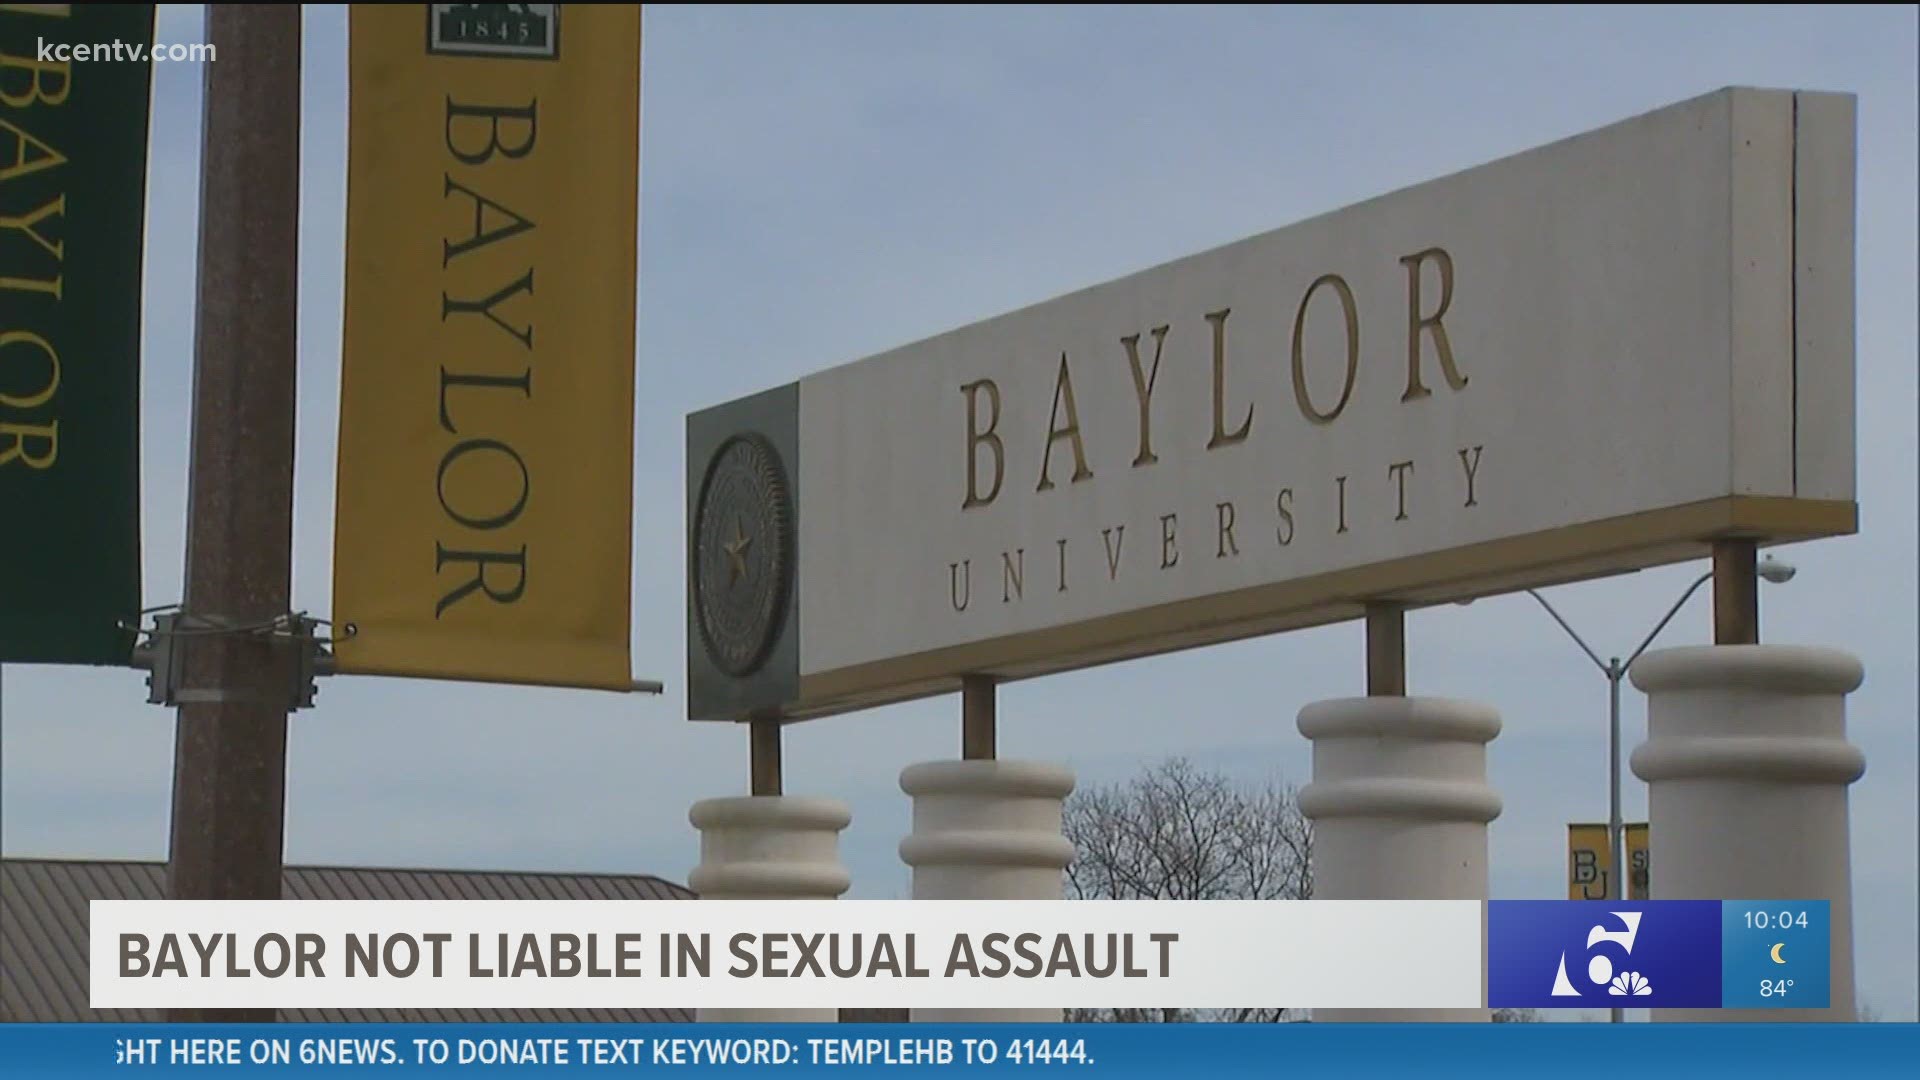 Back in 2017, a former Baylor equestrian team member accused of two football players of sexually assaulting her while she was drunk.